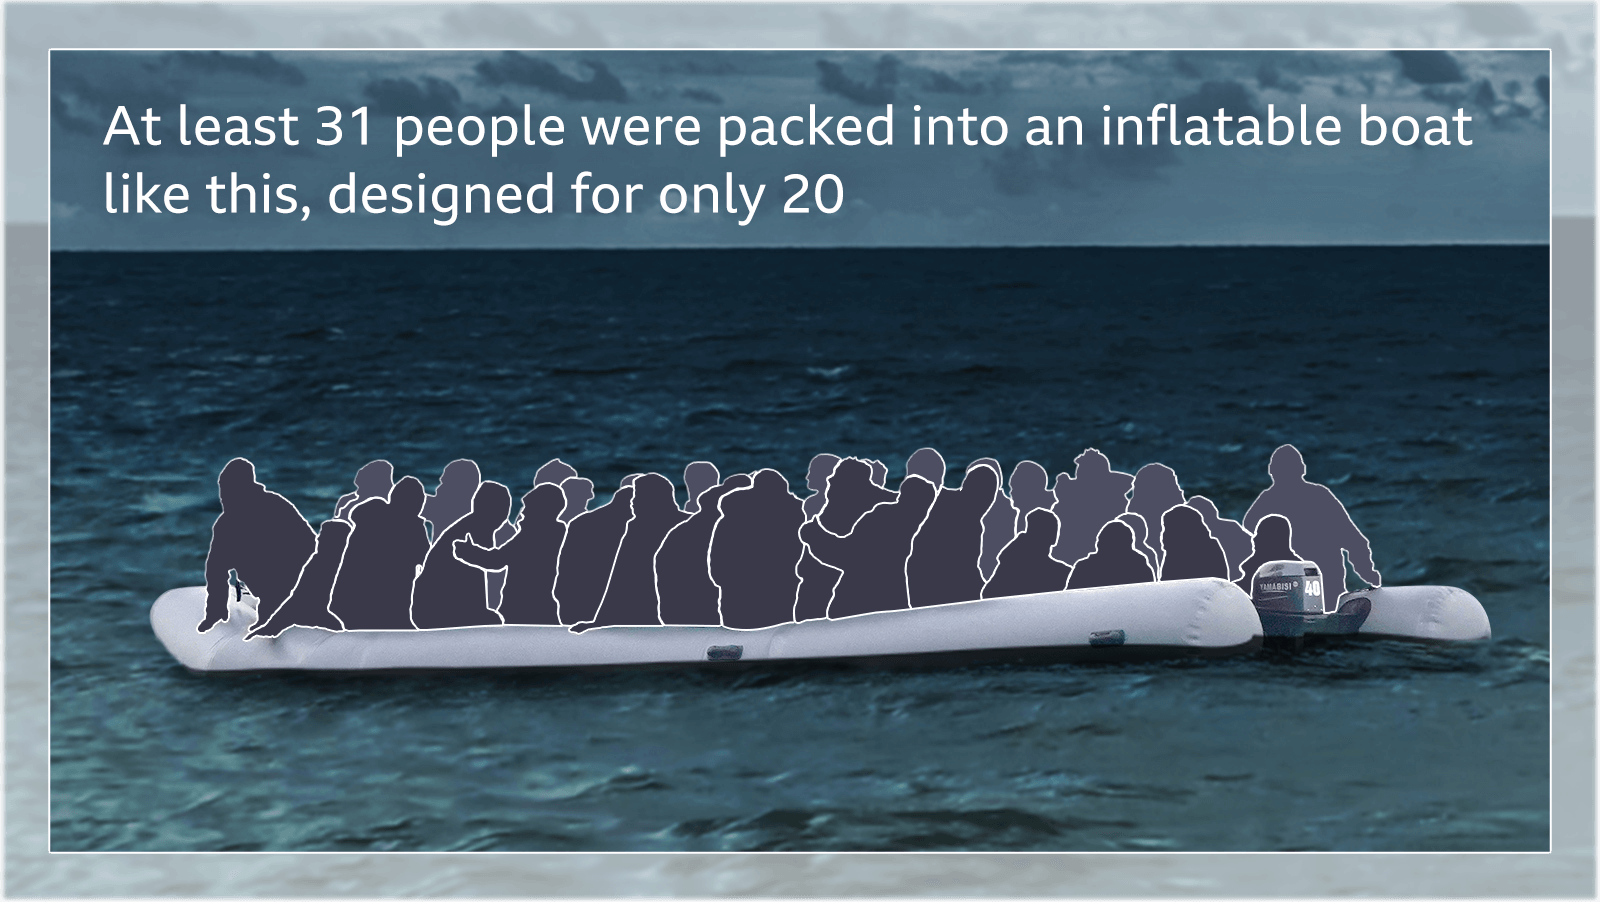 Infographic of a boat similar to that taken by the group